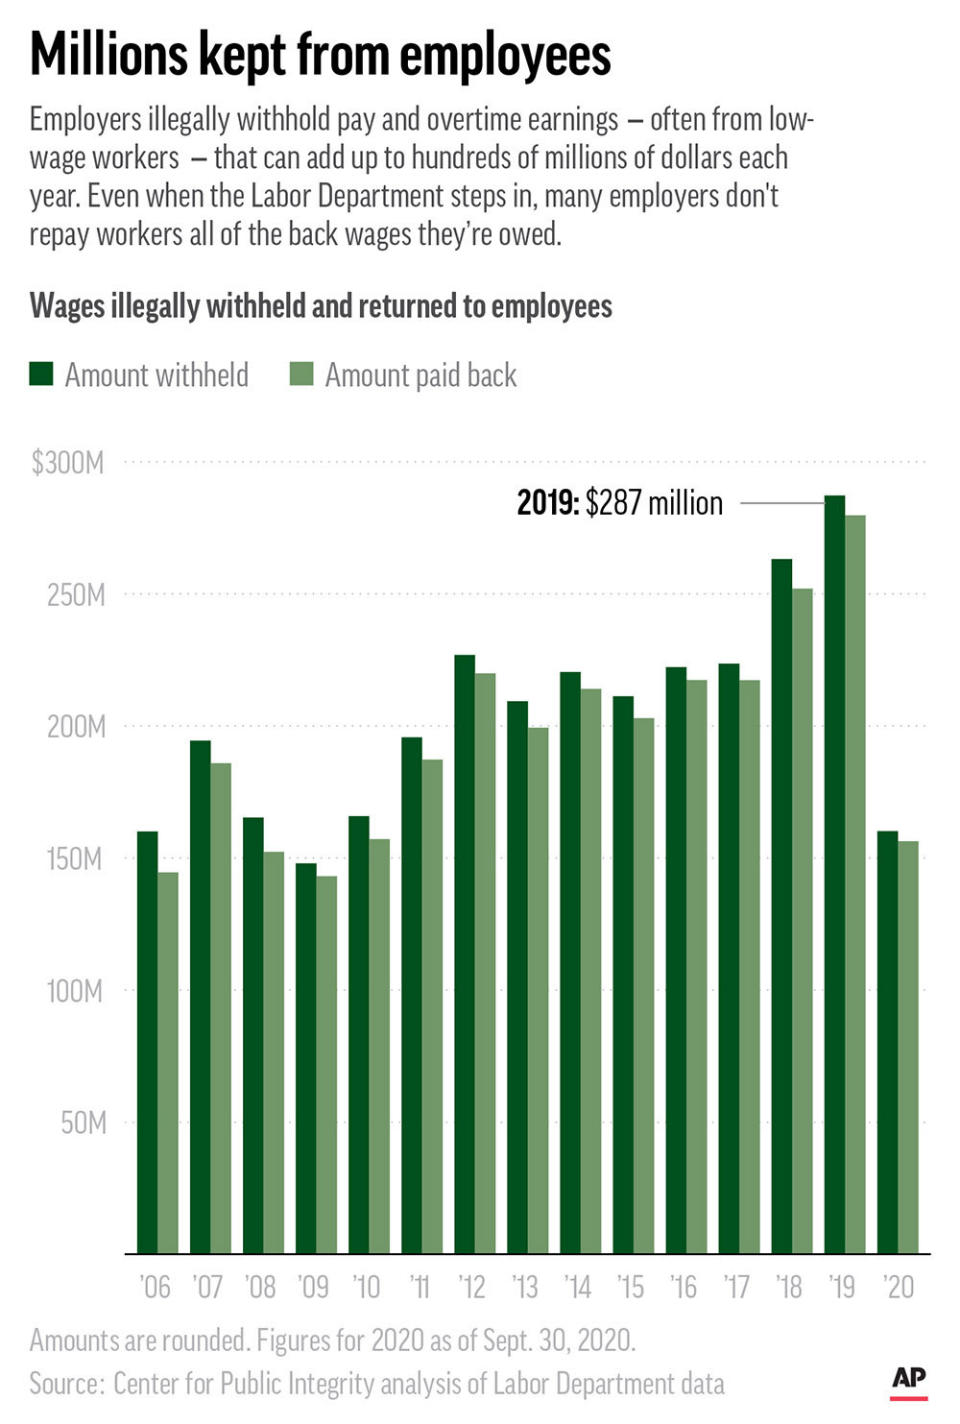 Labor Department data show employers have withheld wages and overtime from workers that can add up to hundreds of millions of dollars a year. (AP Graphic)